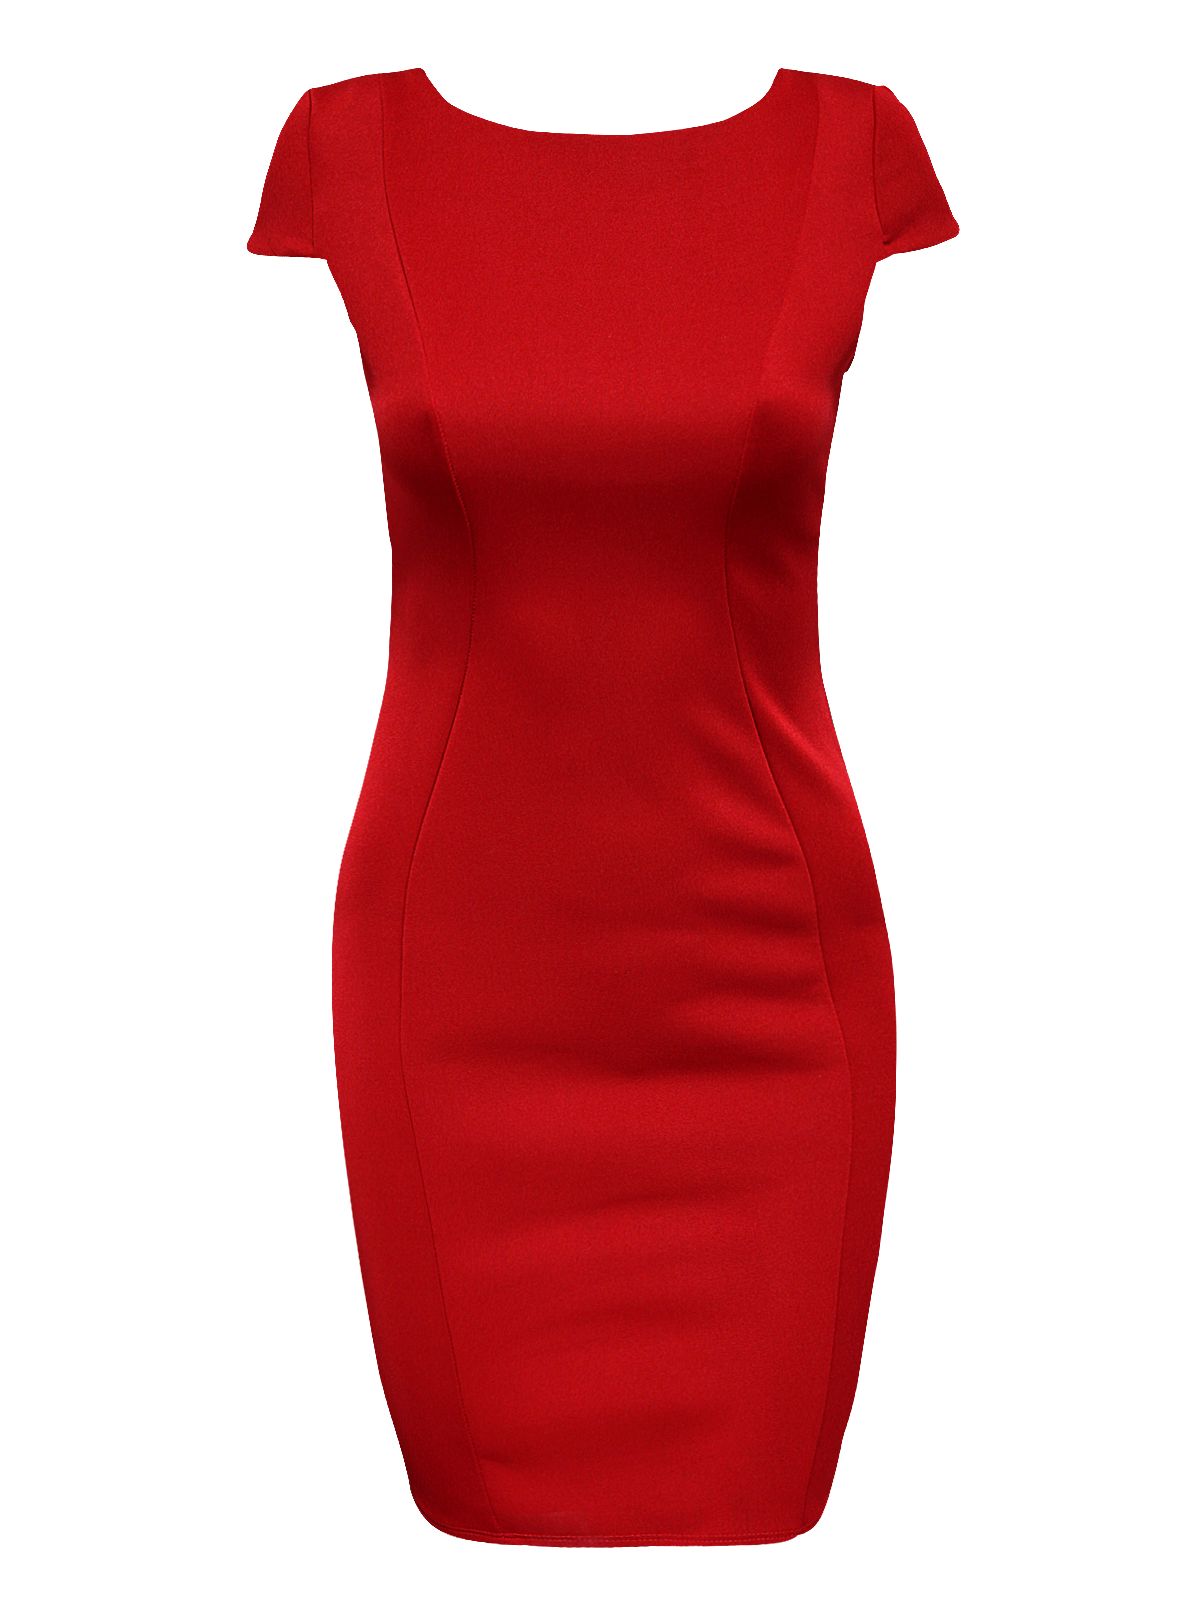 Jane Norman Seamed Dress in Red | Lyst